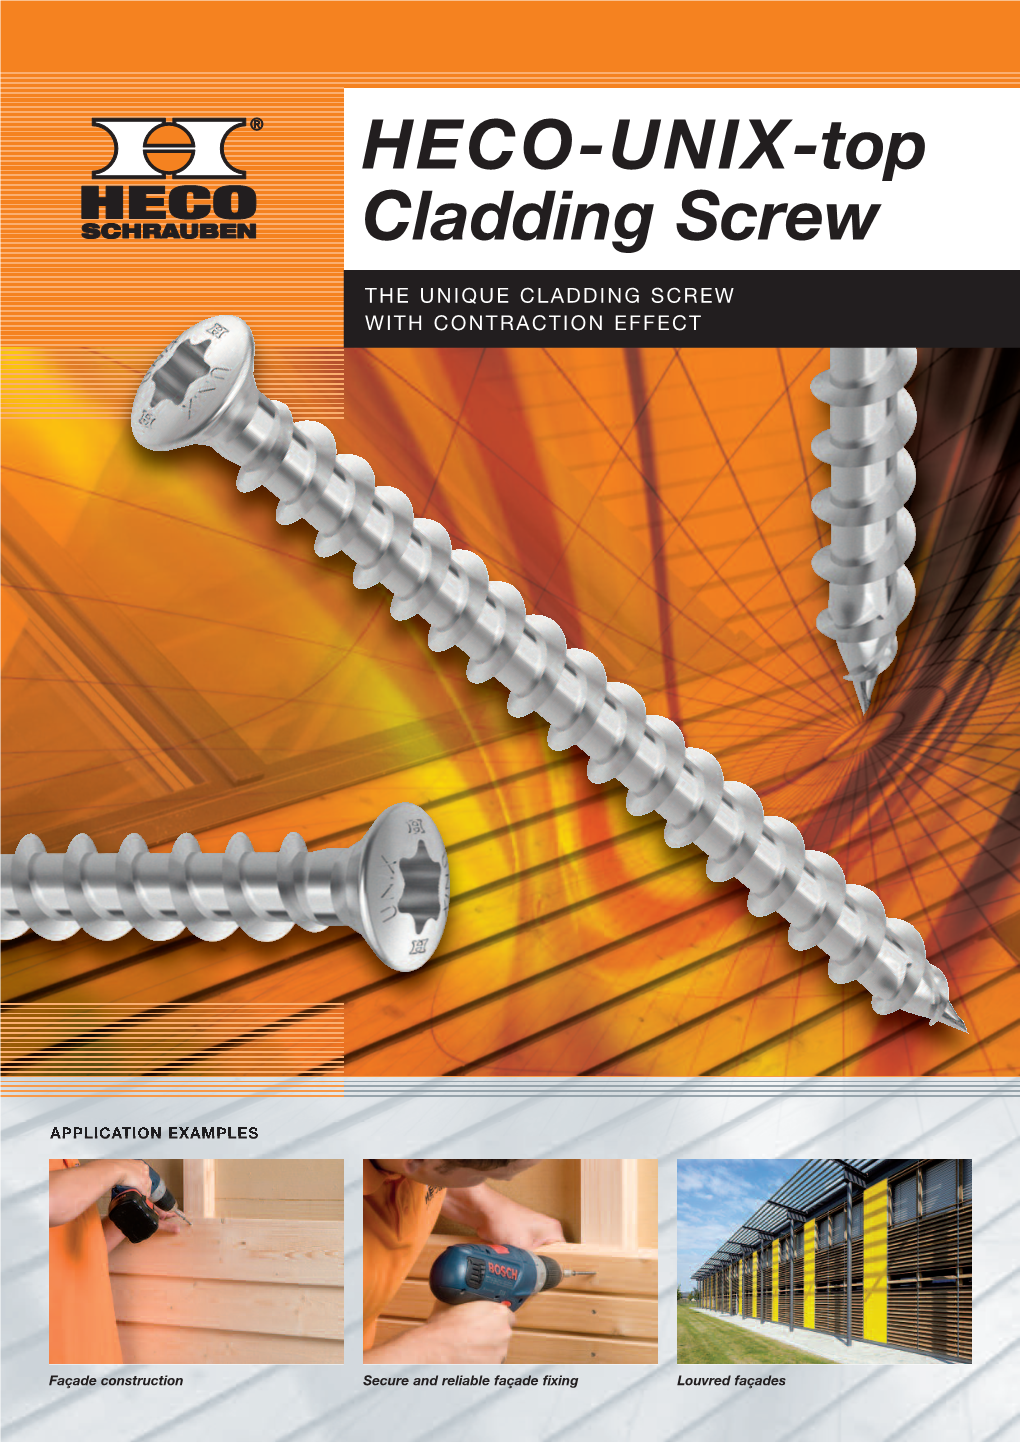 HECO-UNIX-Top Cladding Screw Into the Timber